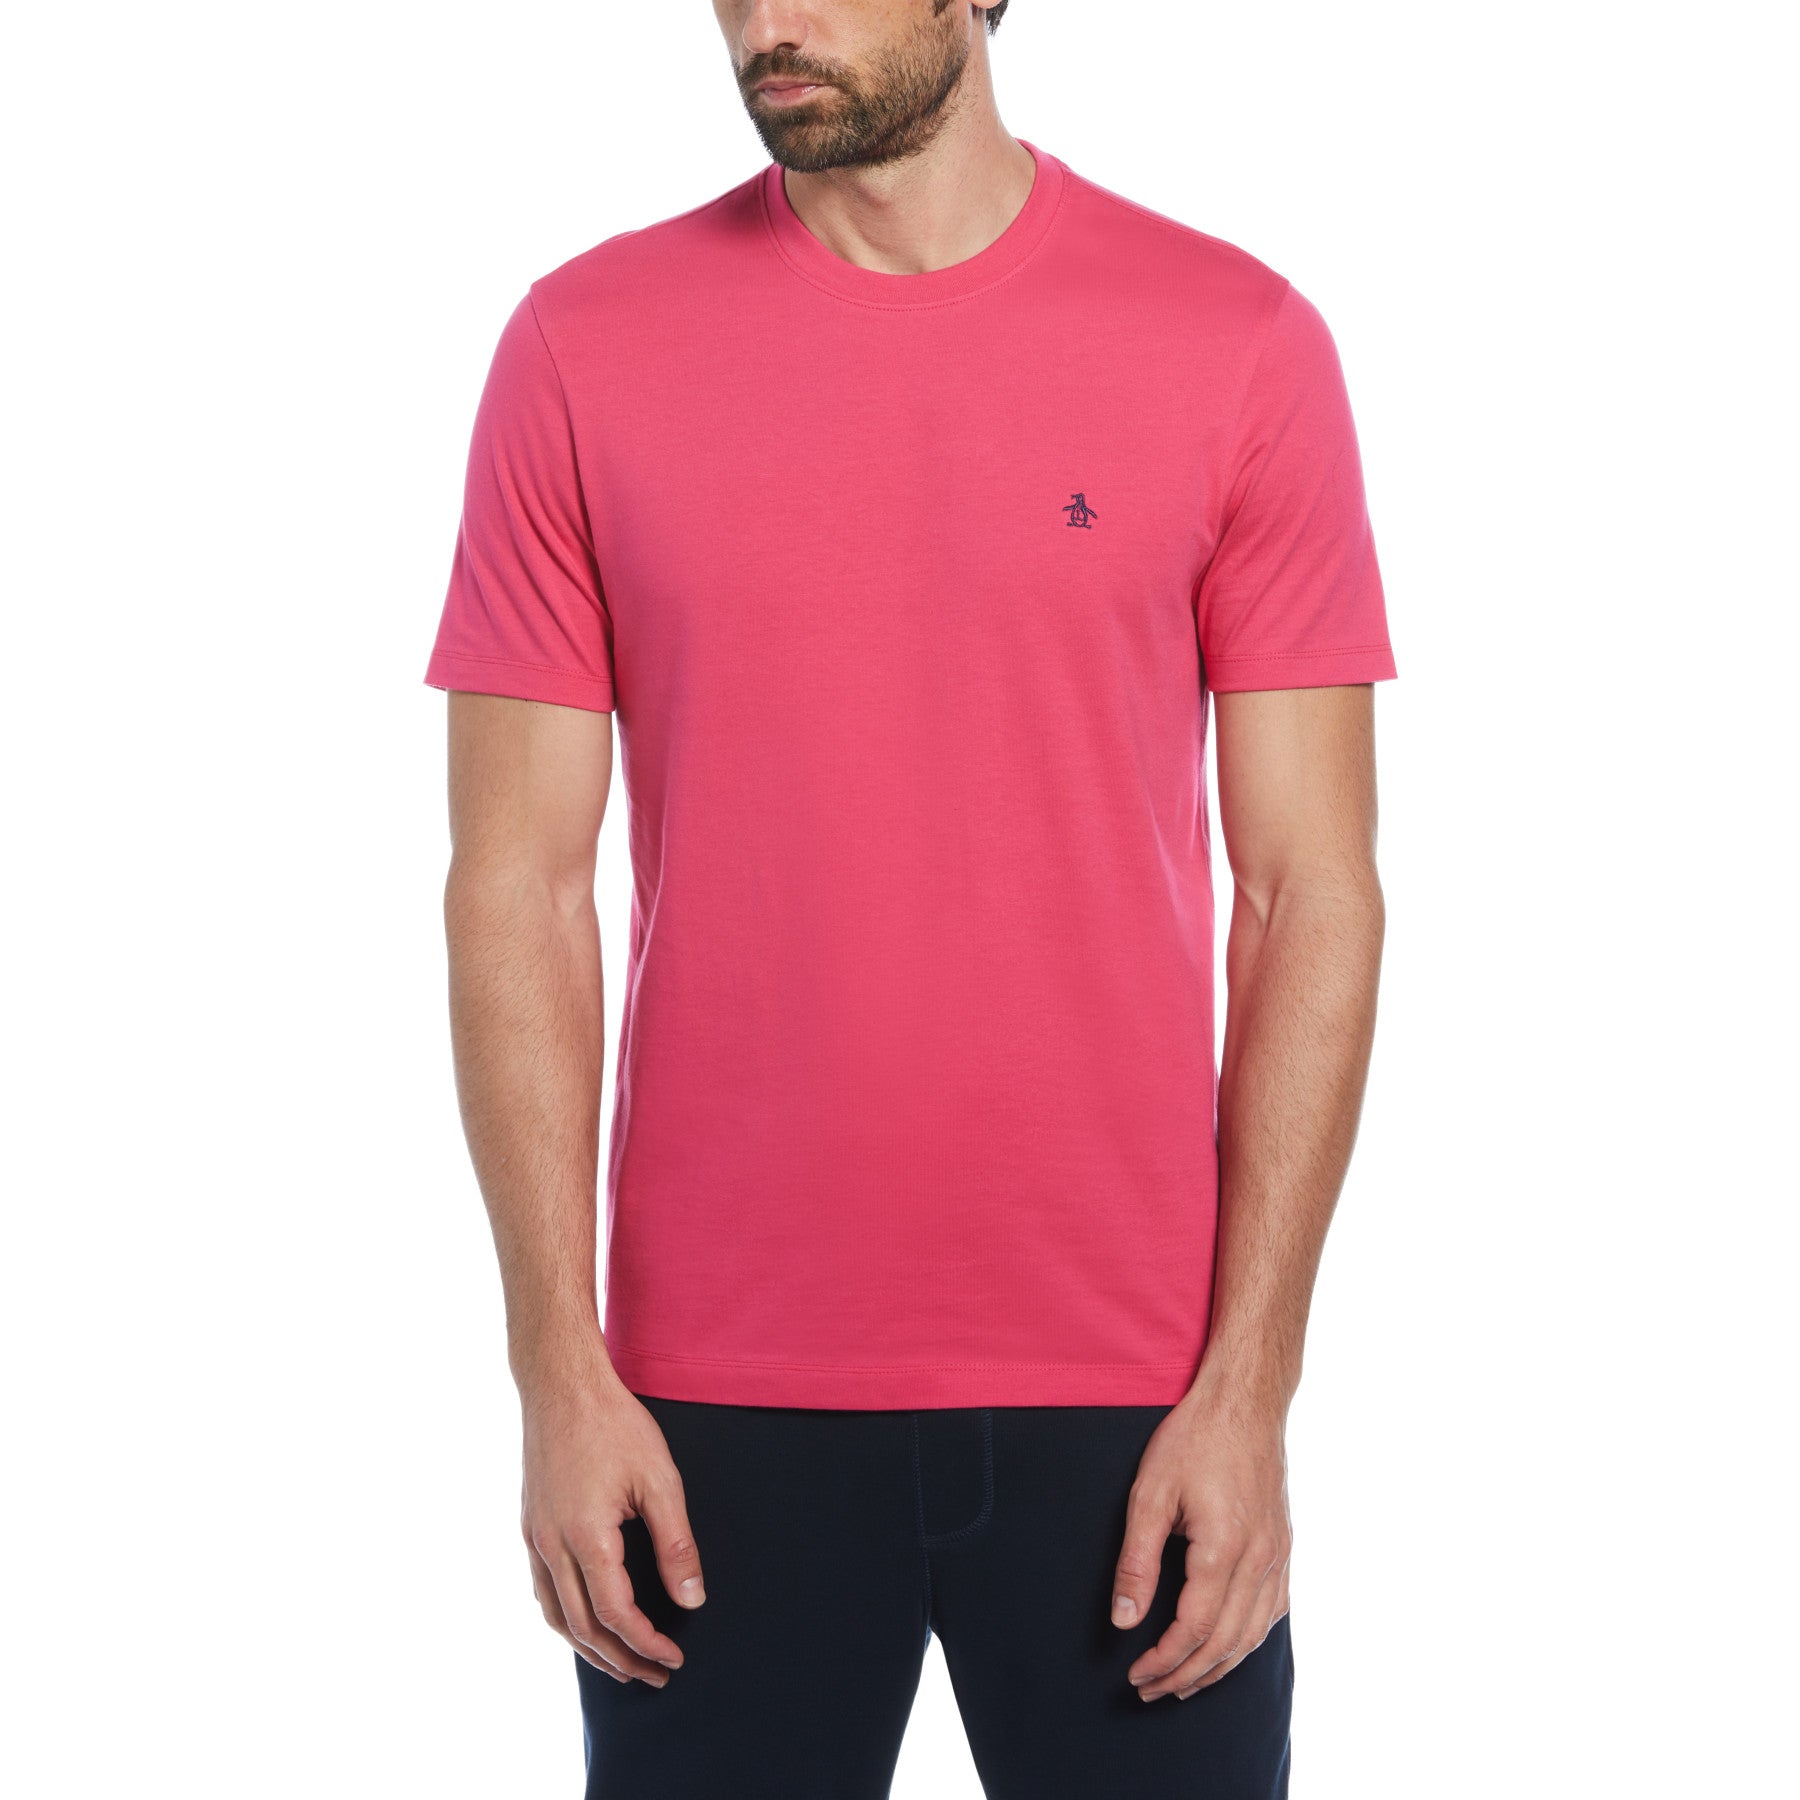 Embroidered Pete T-Shirt In Raspberry Sorbet